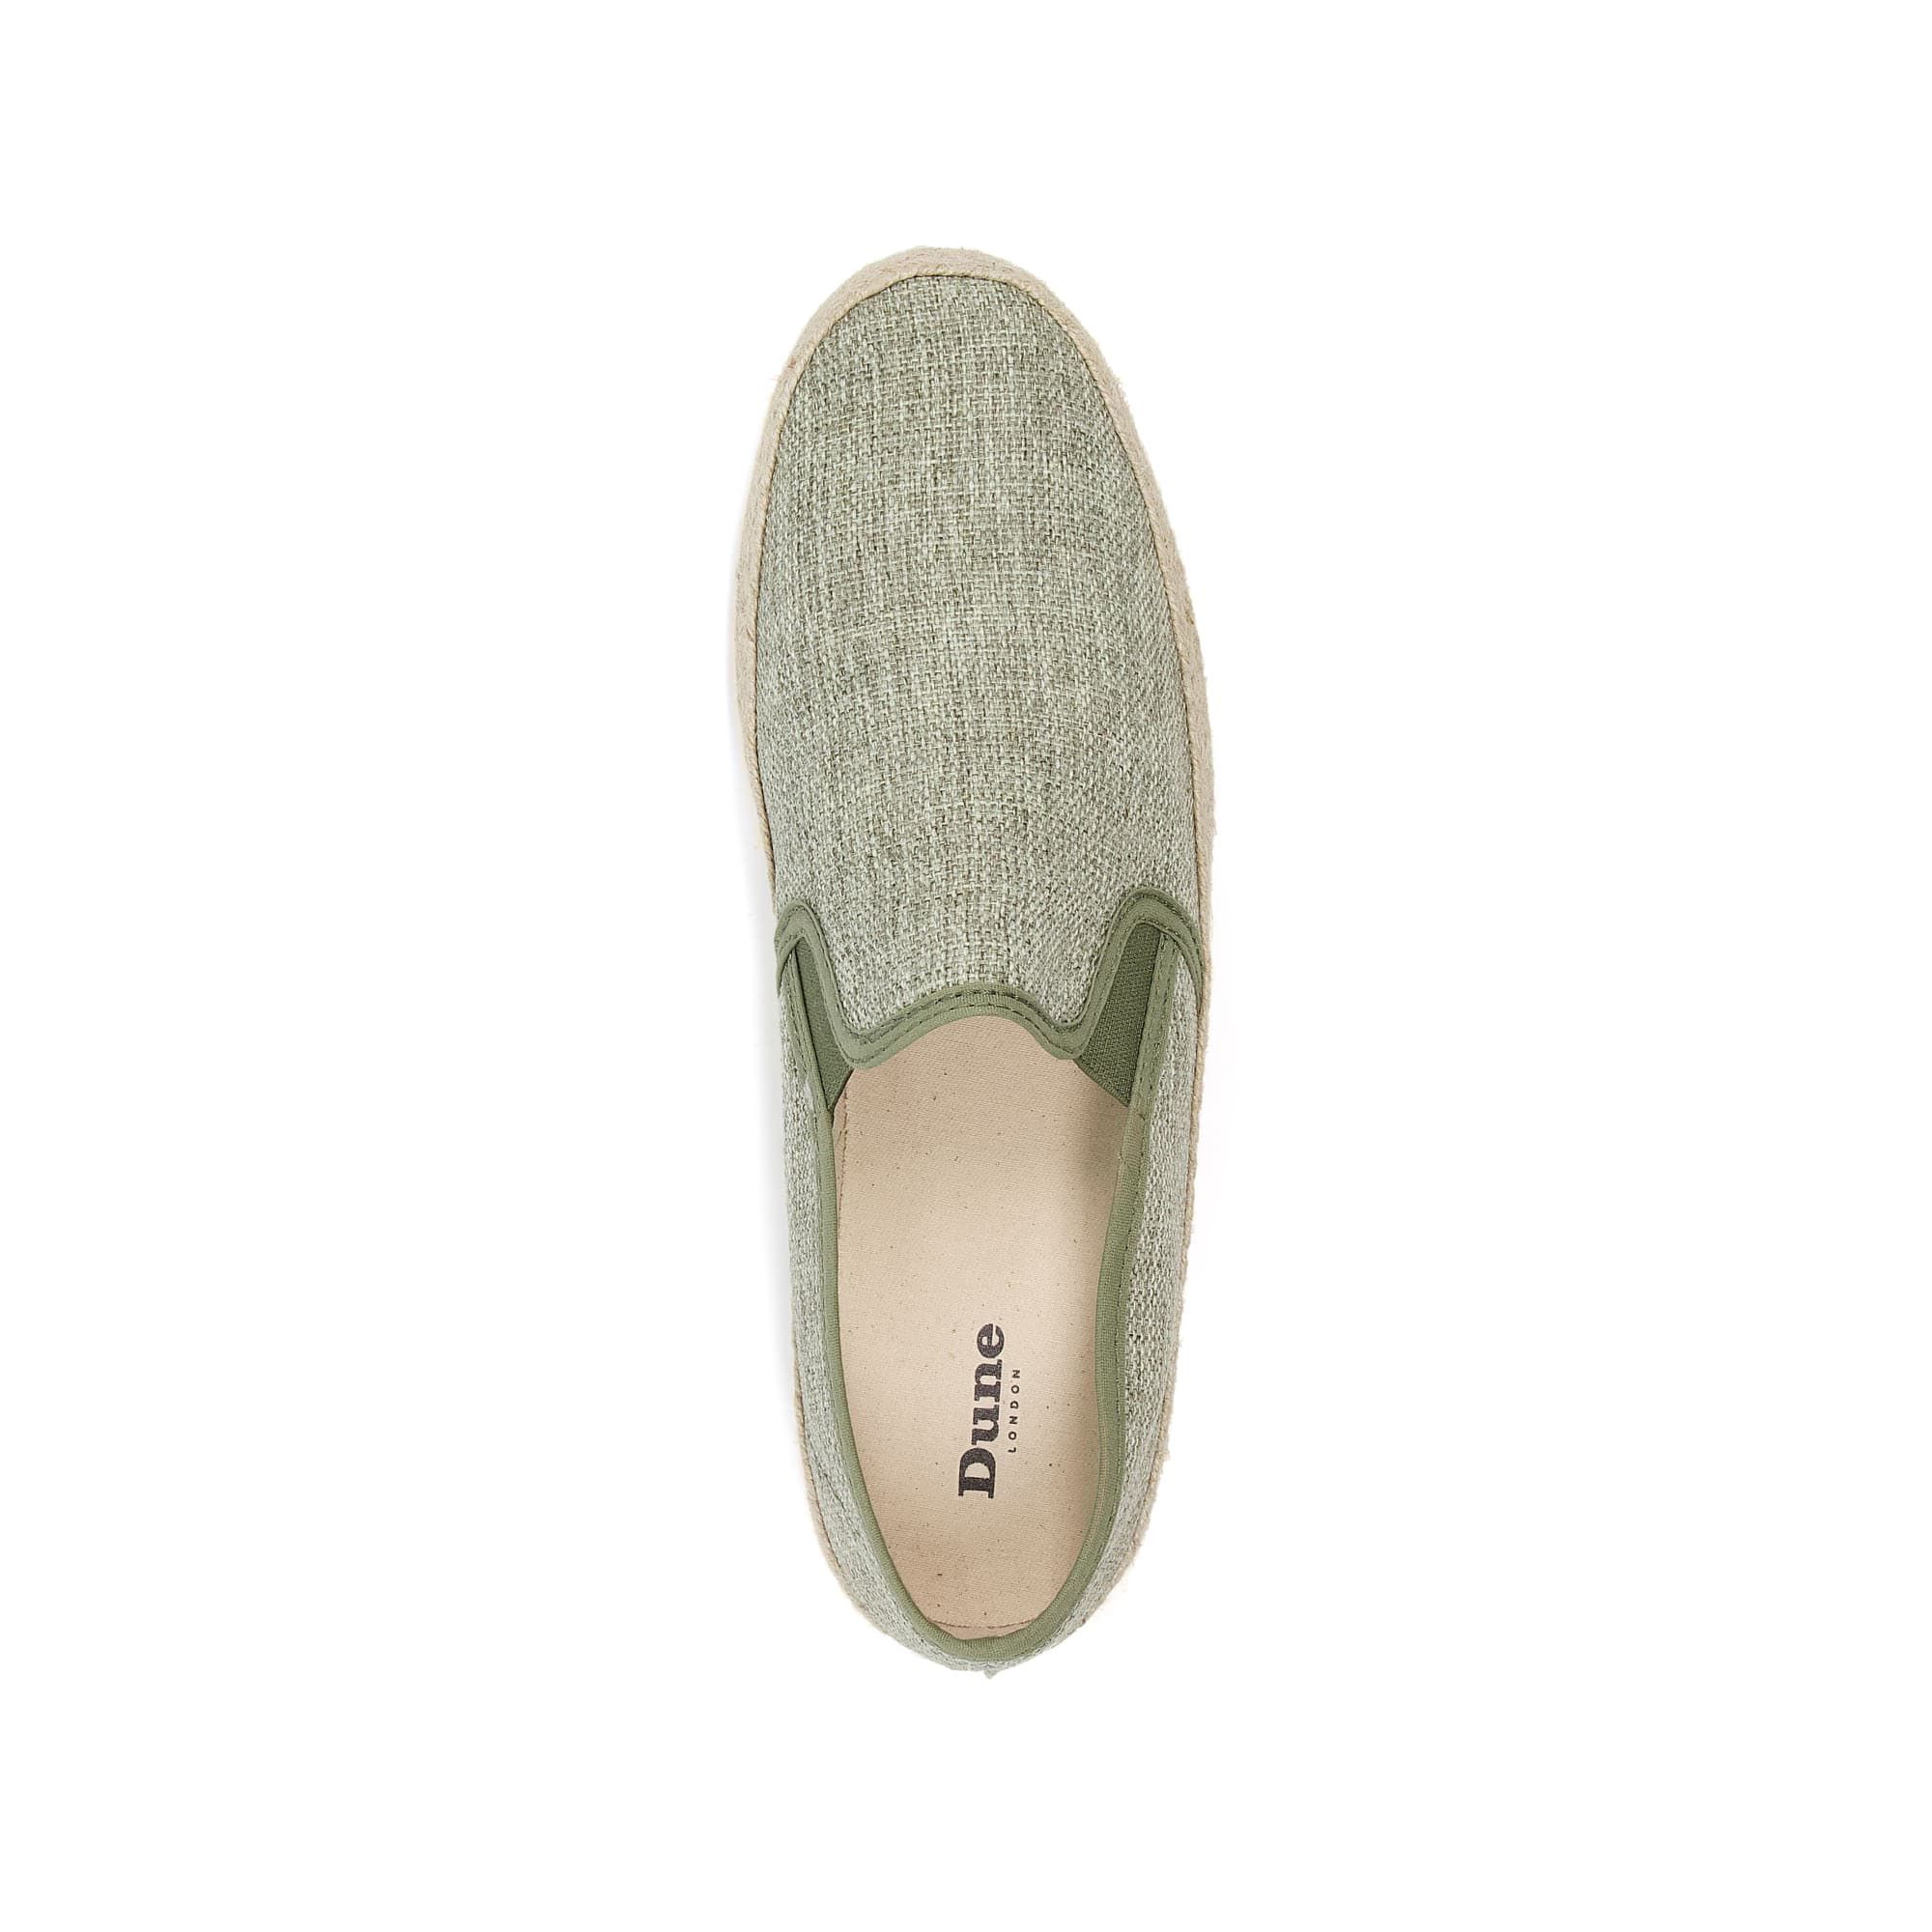 Every summer wardrobe needs a pair of espadrilles. This simple style is soft and breathable to ensure comfort on warmer days. Available in a range of natural textures.